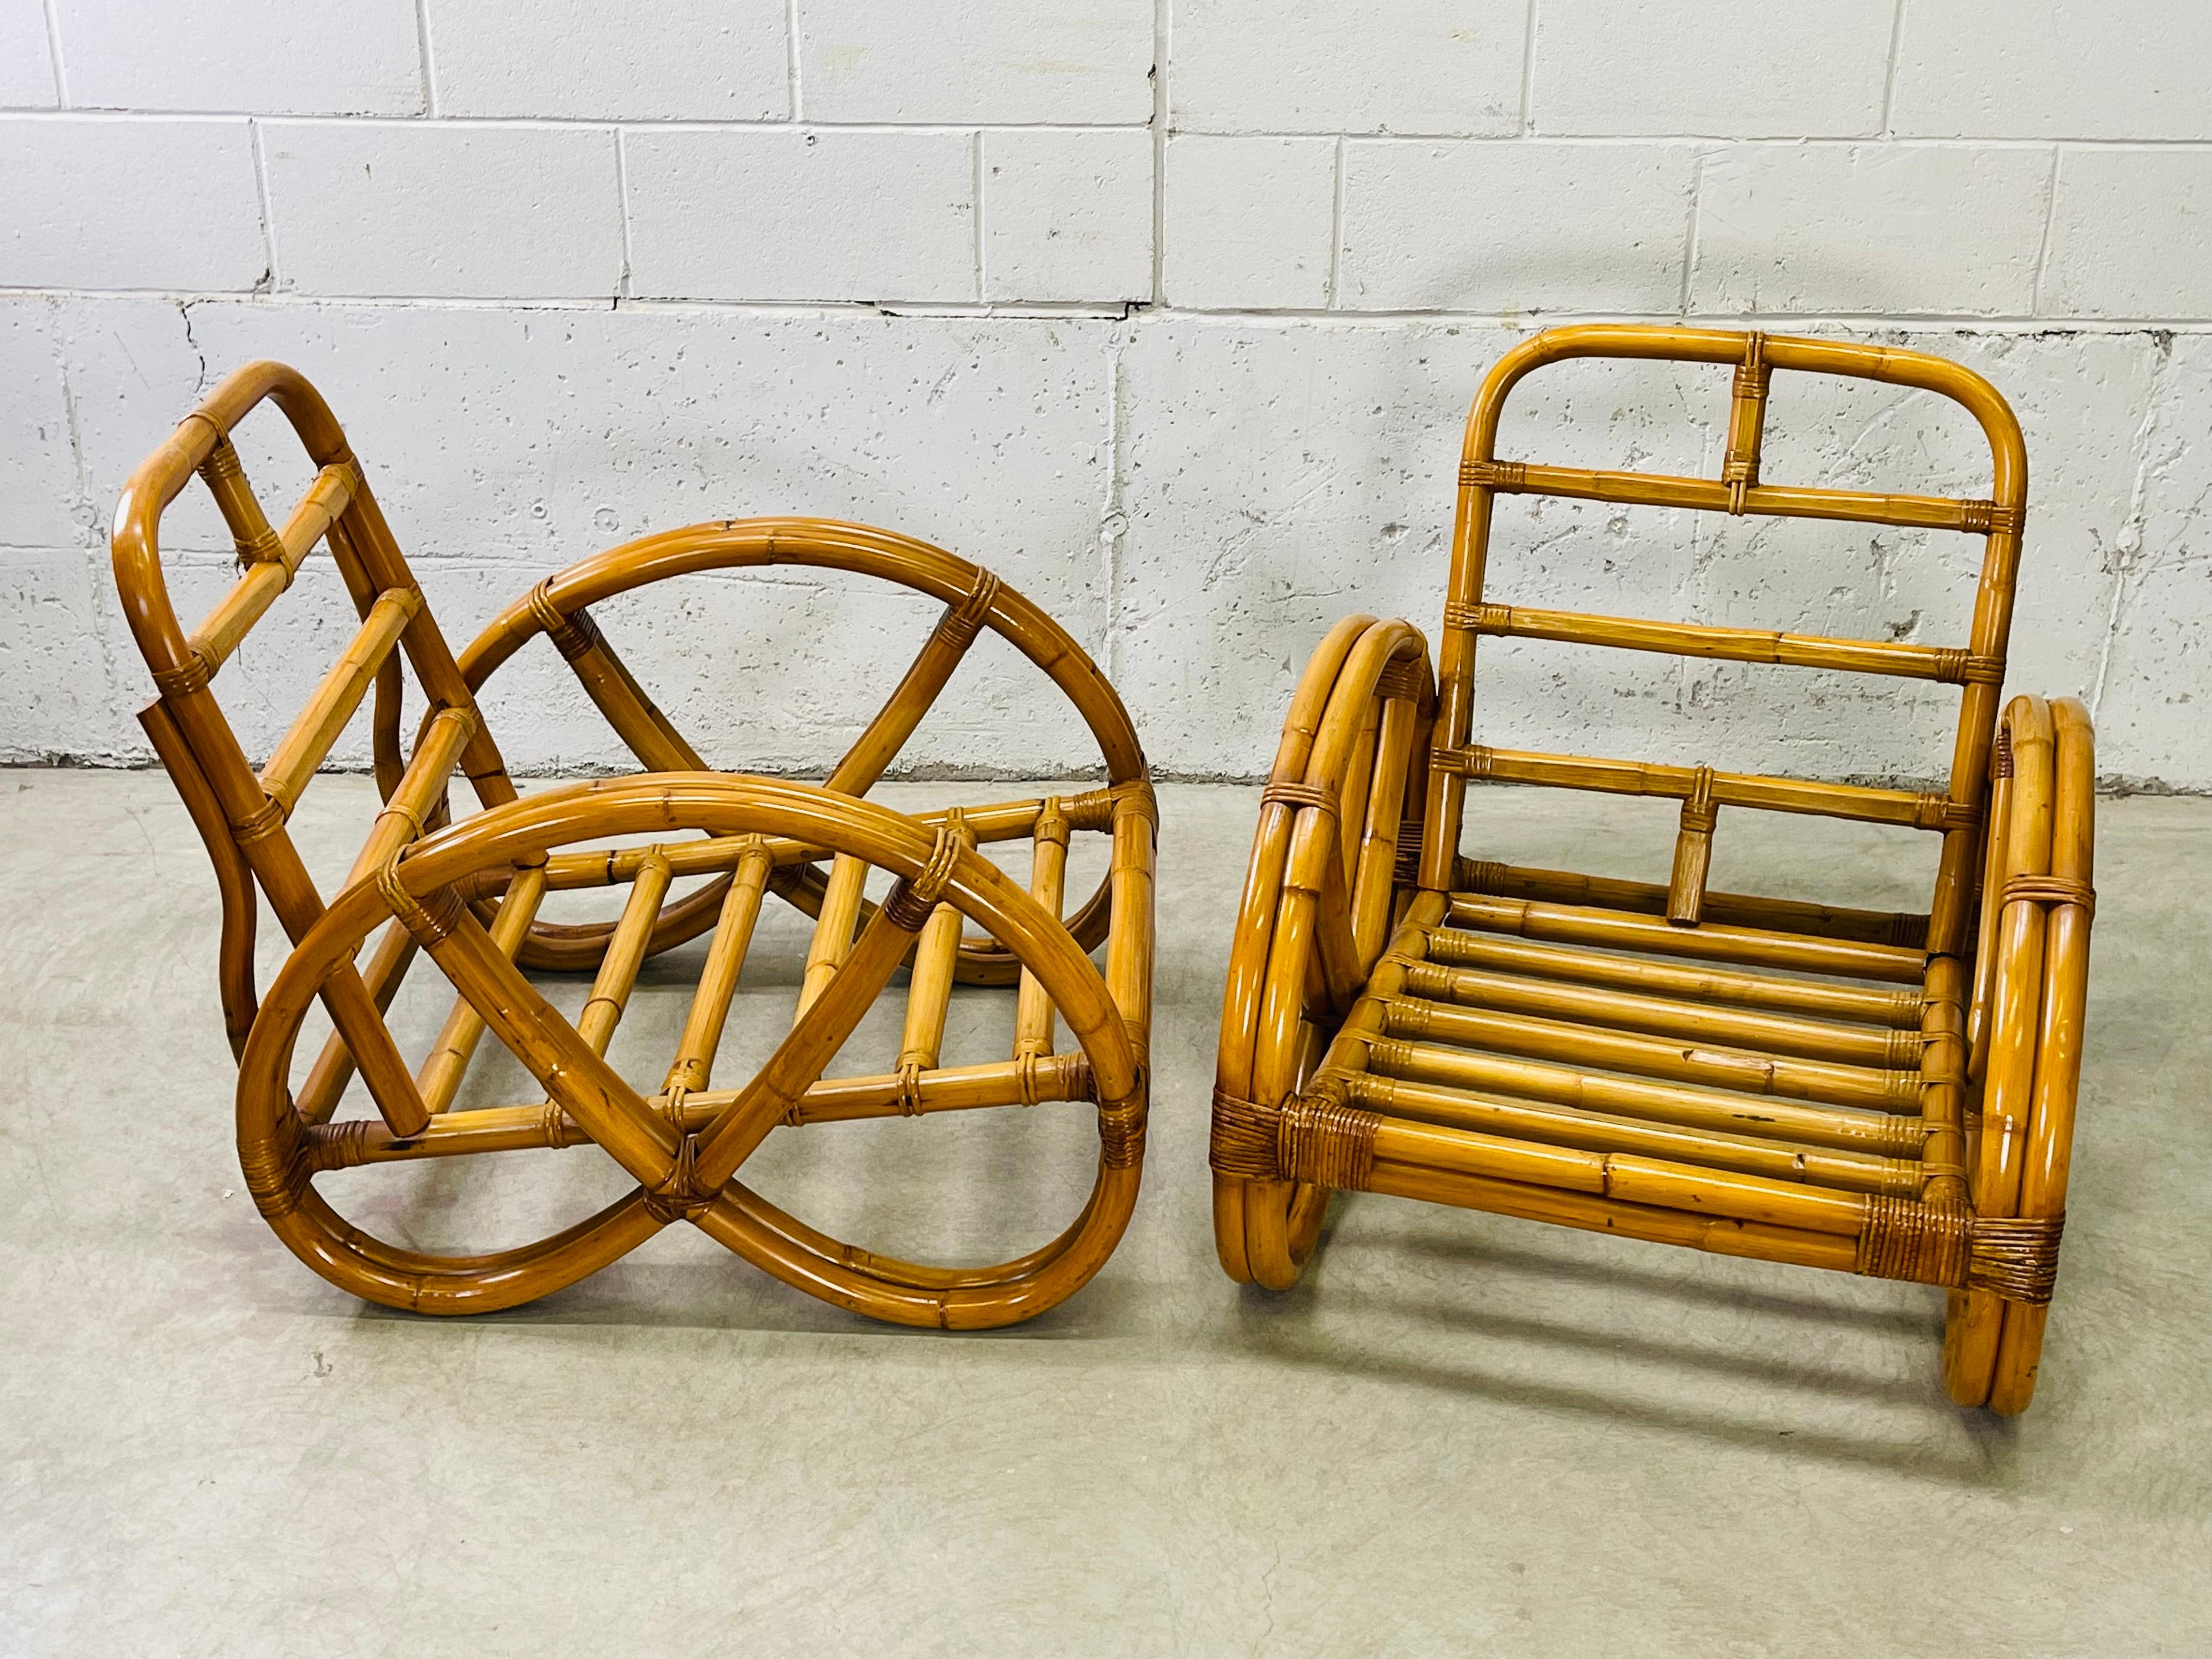 Vintage 1950s pair of rattan pretzel style two strand lounge chair frames. The chairs have a true pretzel design on the arms and they are in excellent condition. Solid and sturdy with no breaks in the rattan. No marks.